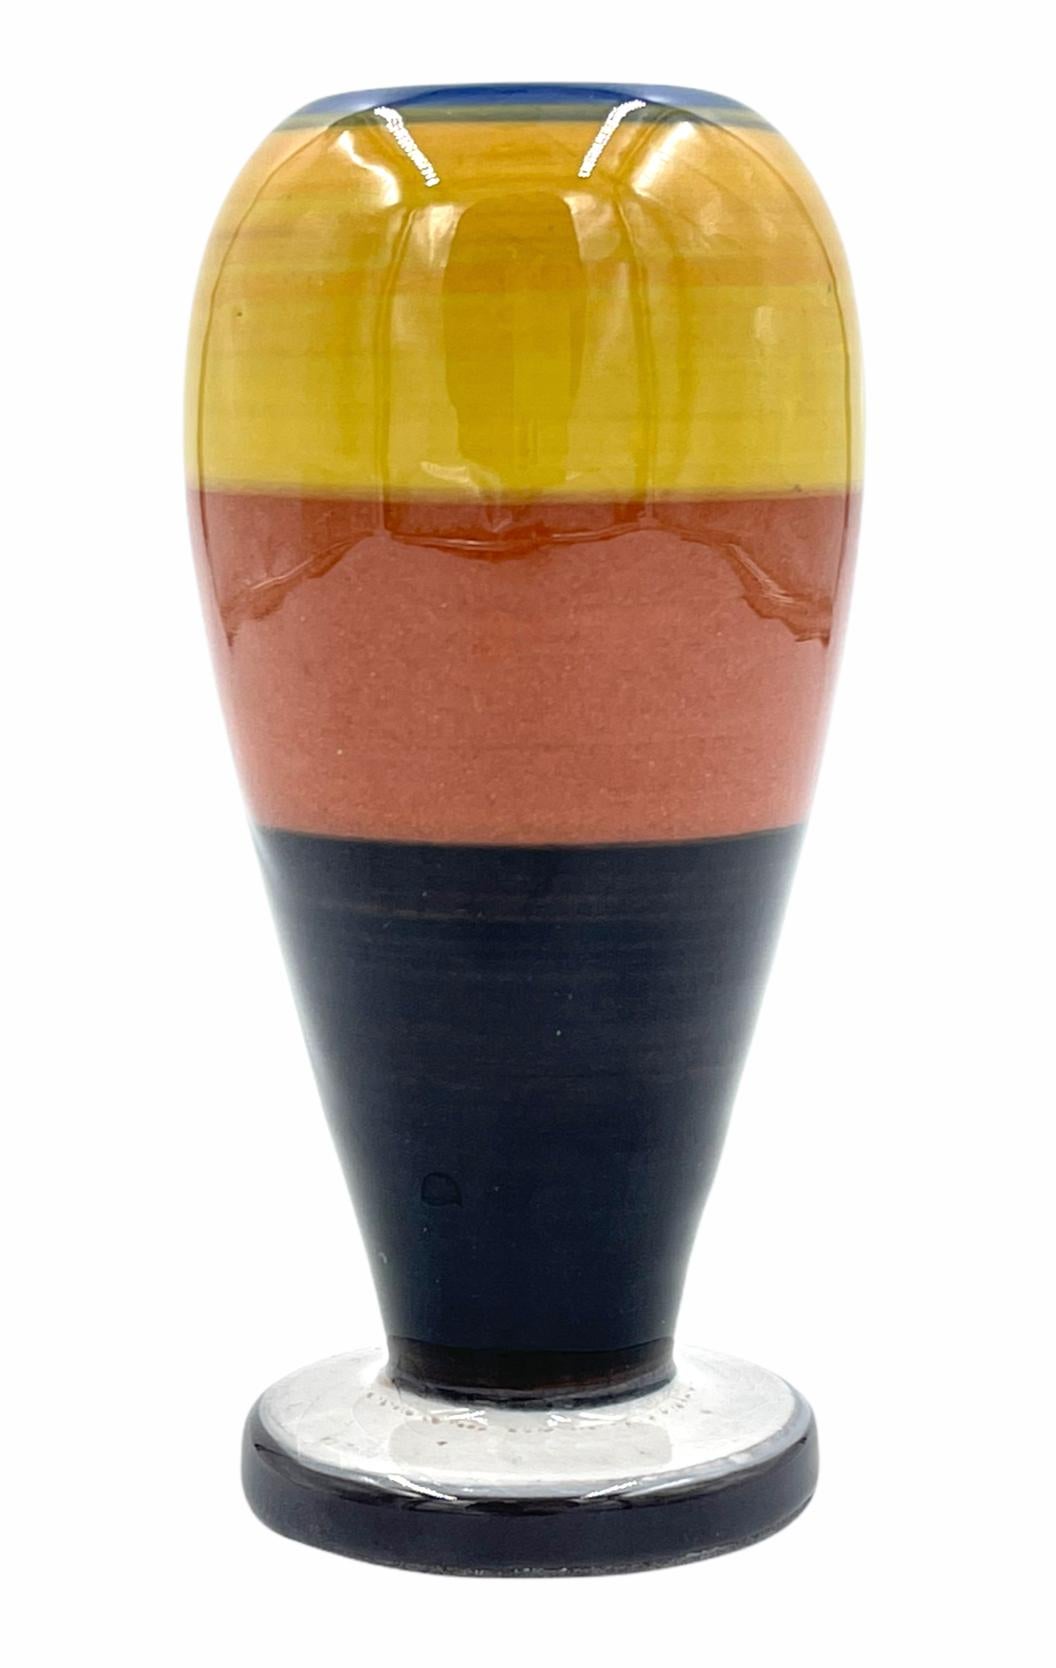 Expo vase 1997 in colors of yellow, brick and black. Peter Shire, a founding member of Sottsass' Memphis Milano Group is an LA-based artist whose work eludes all attempts at categorization. He has created ceramics, furniture, toys, interior designs